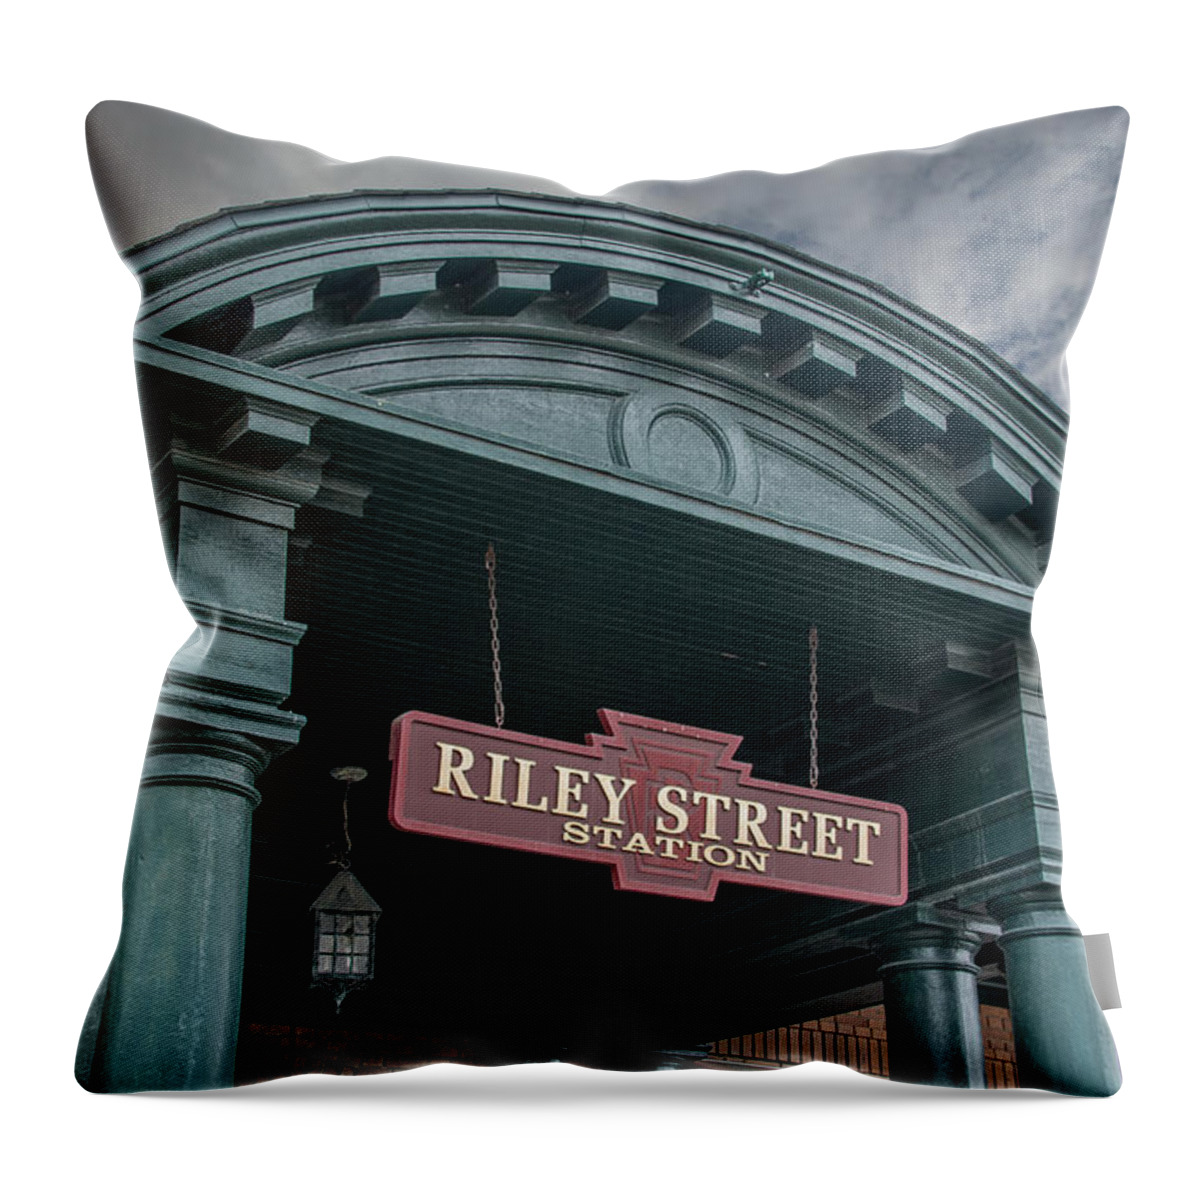 East Aurora Ny Throw Pillow featuring the photograph Riley Street Station by Guy Whiteley